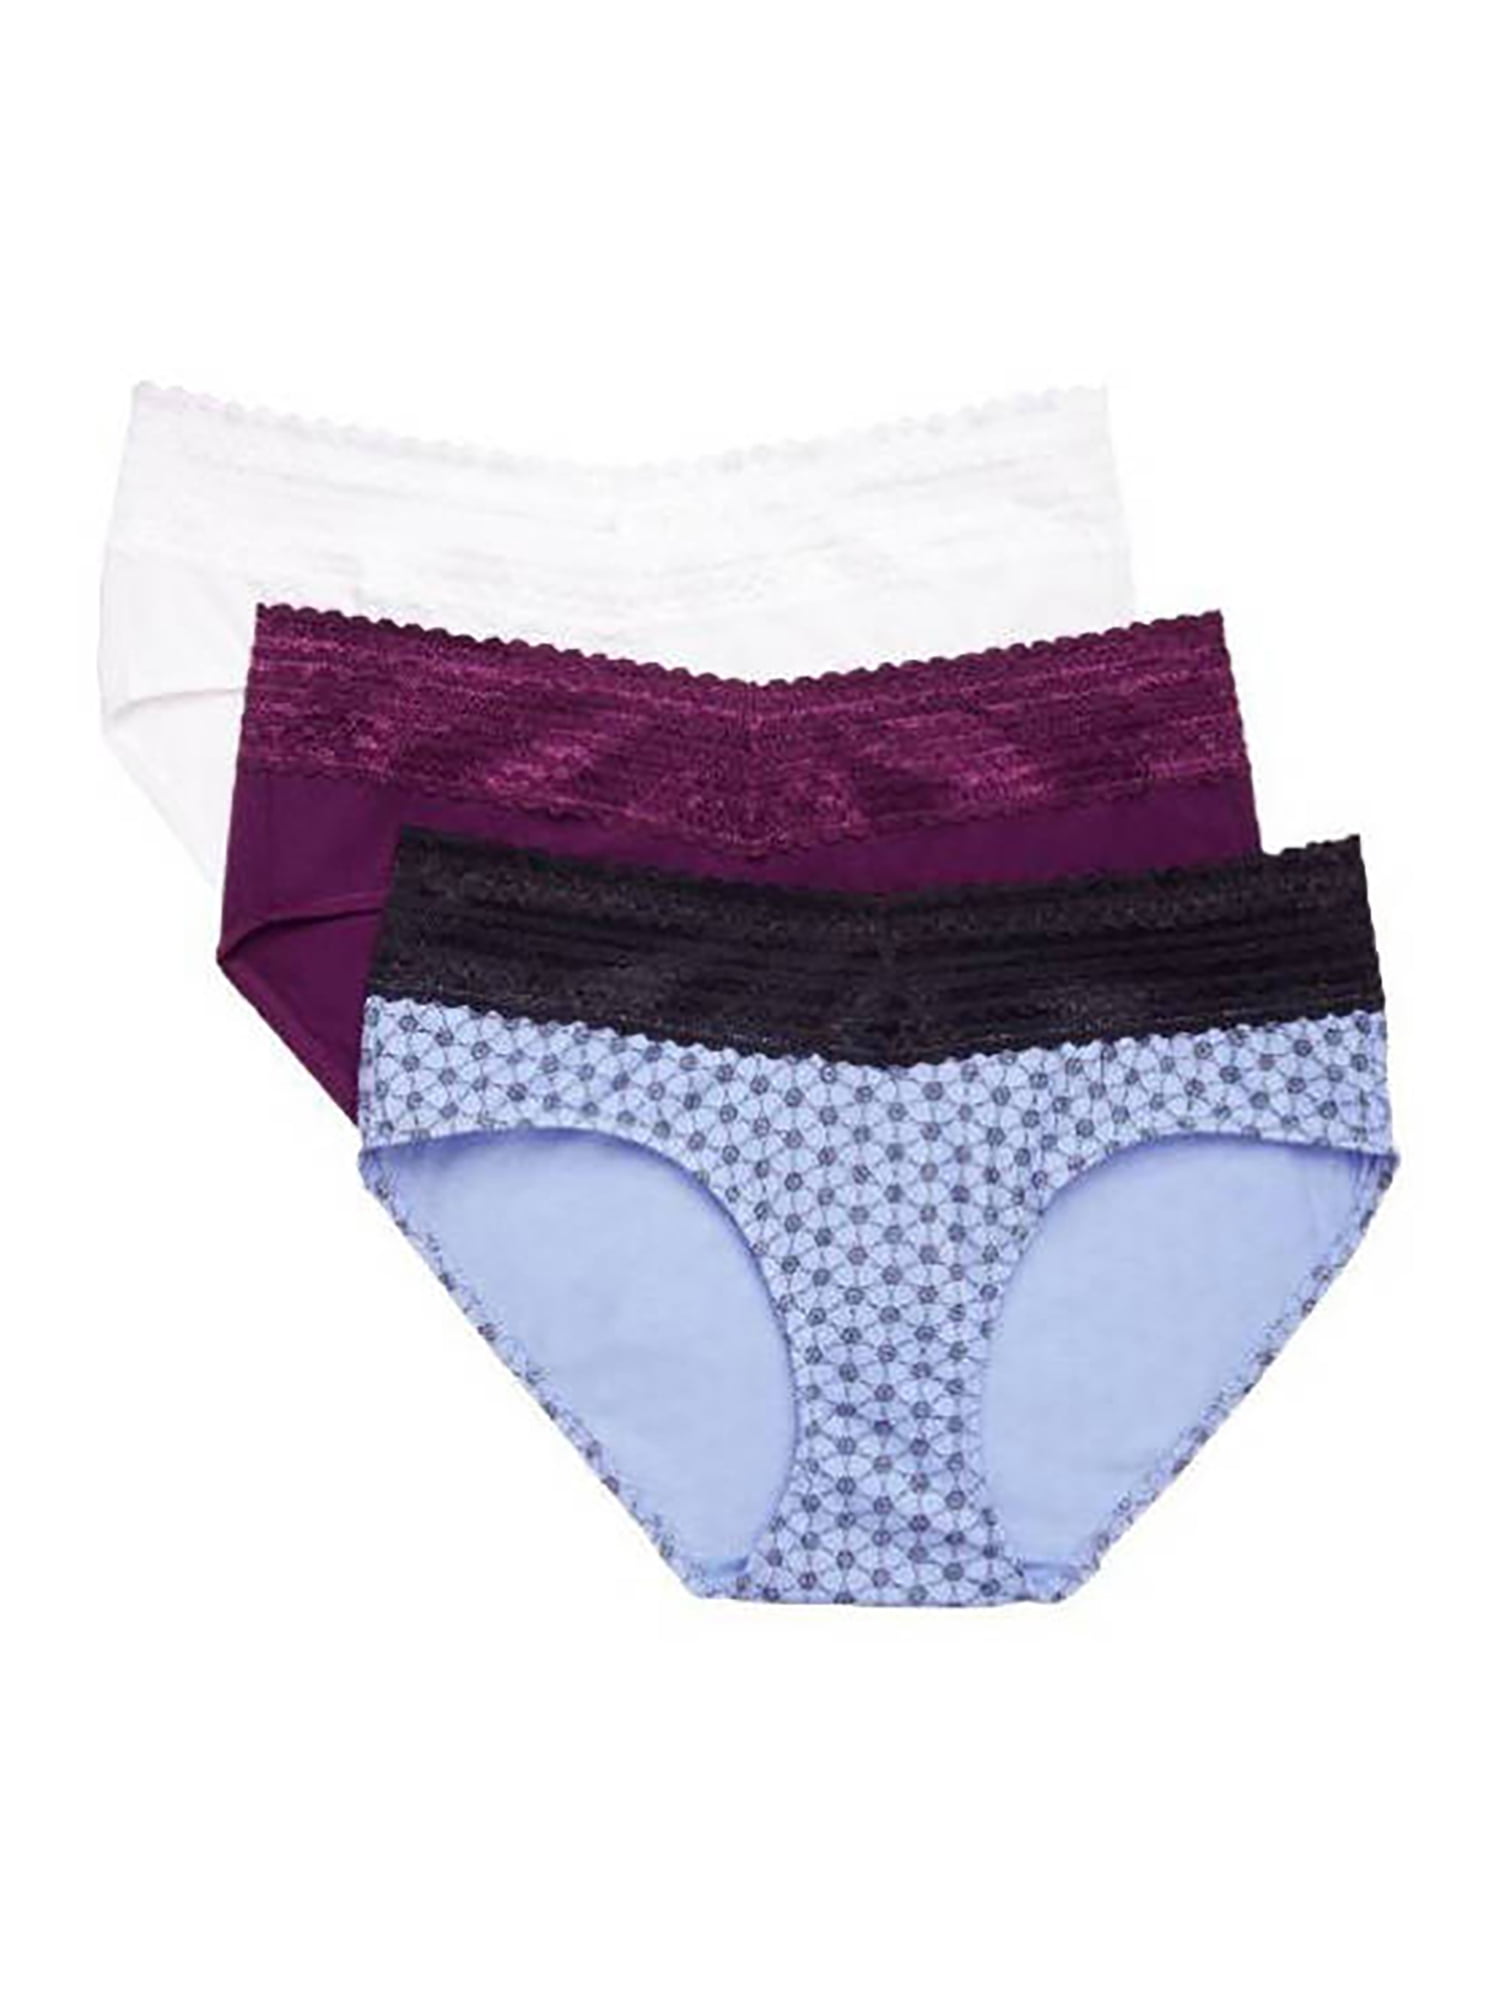 Blissful Benefits by Warner's No Muffin Top Hipster with Lace Panty - 3  Pack, Size: Small, Assorted